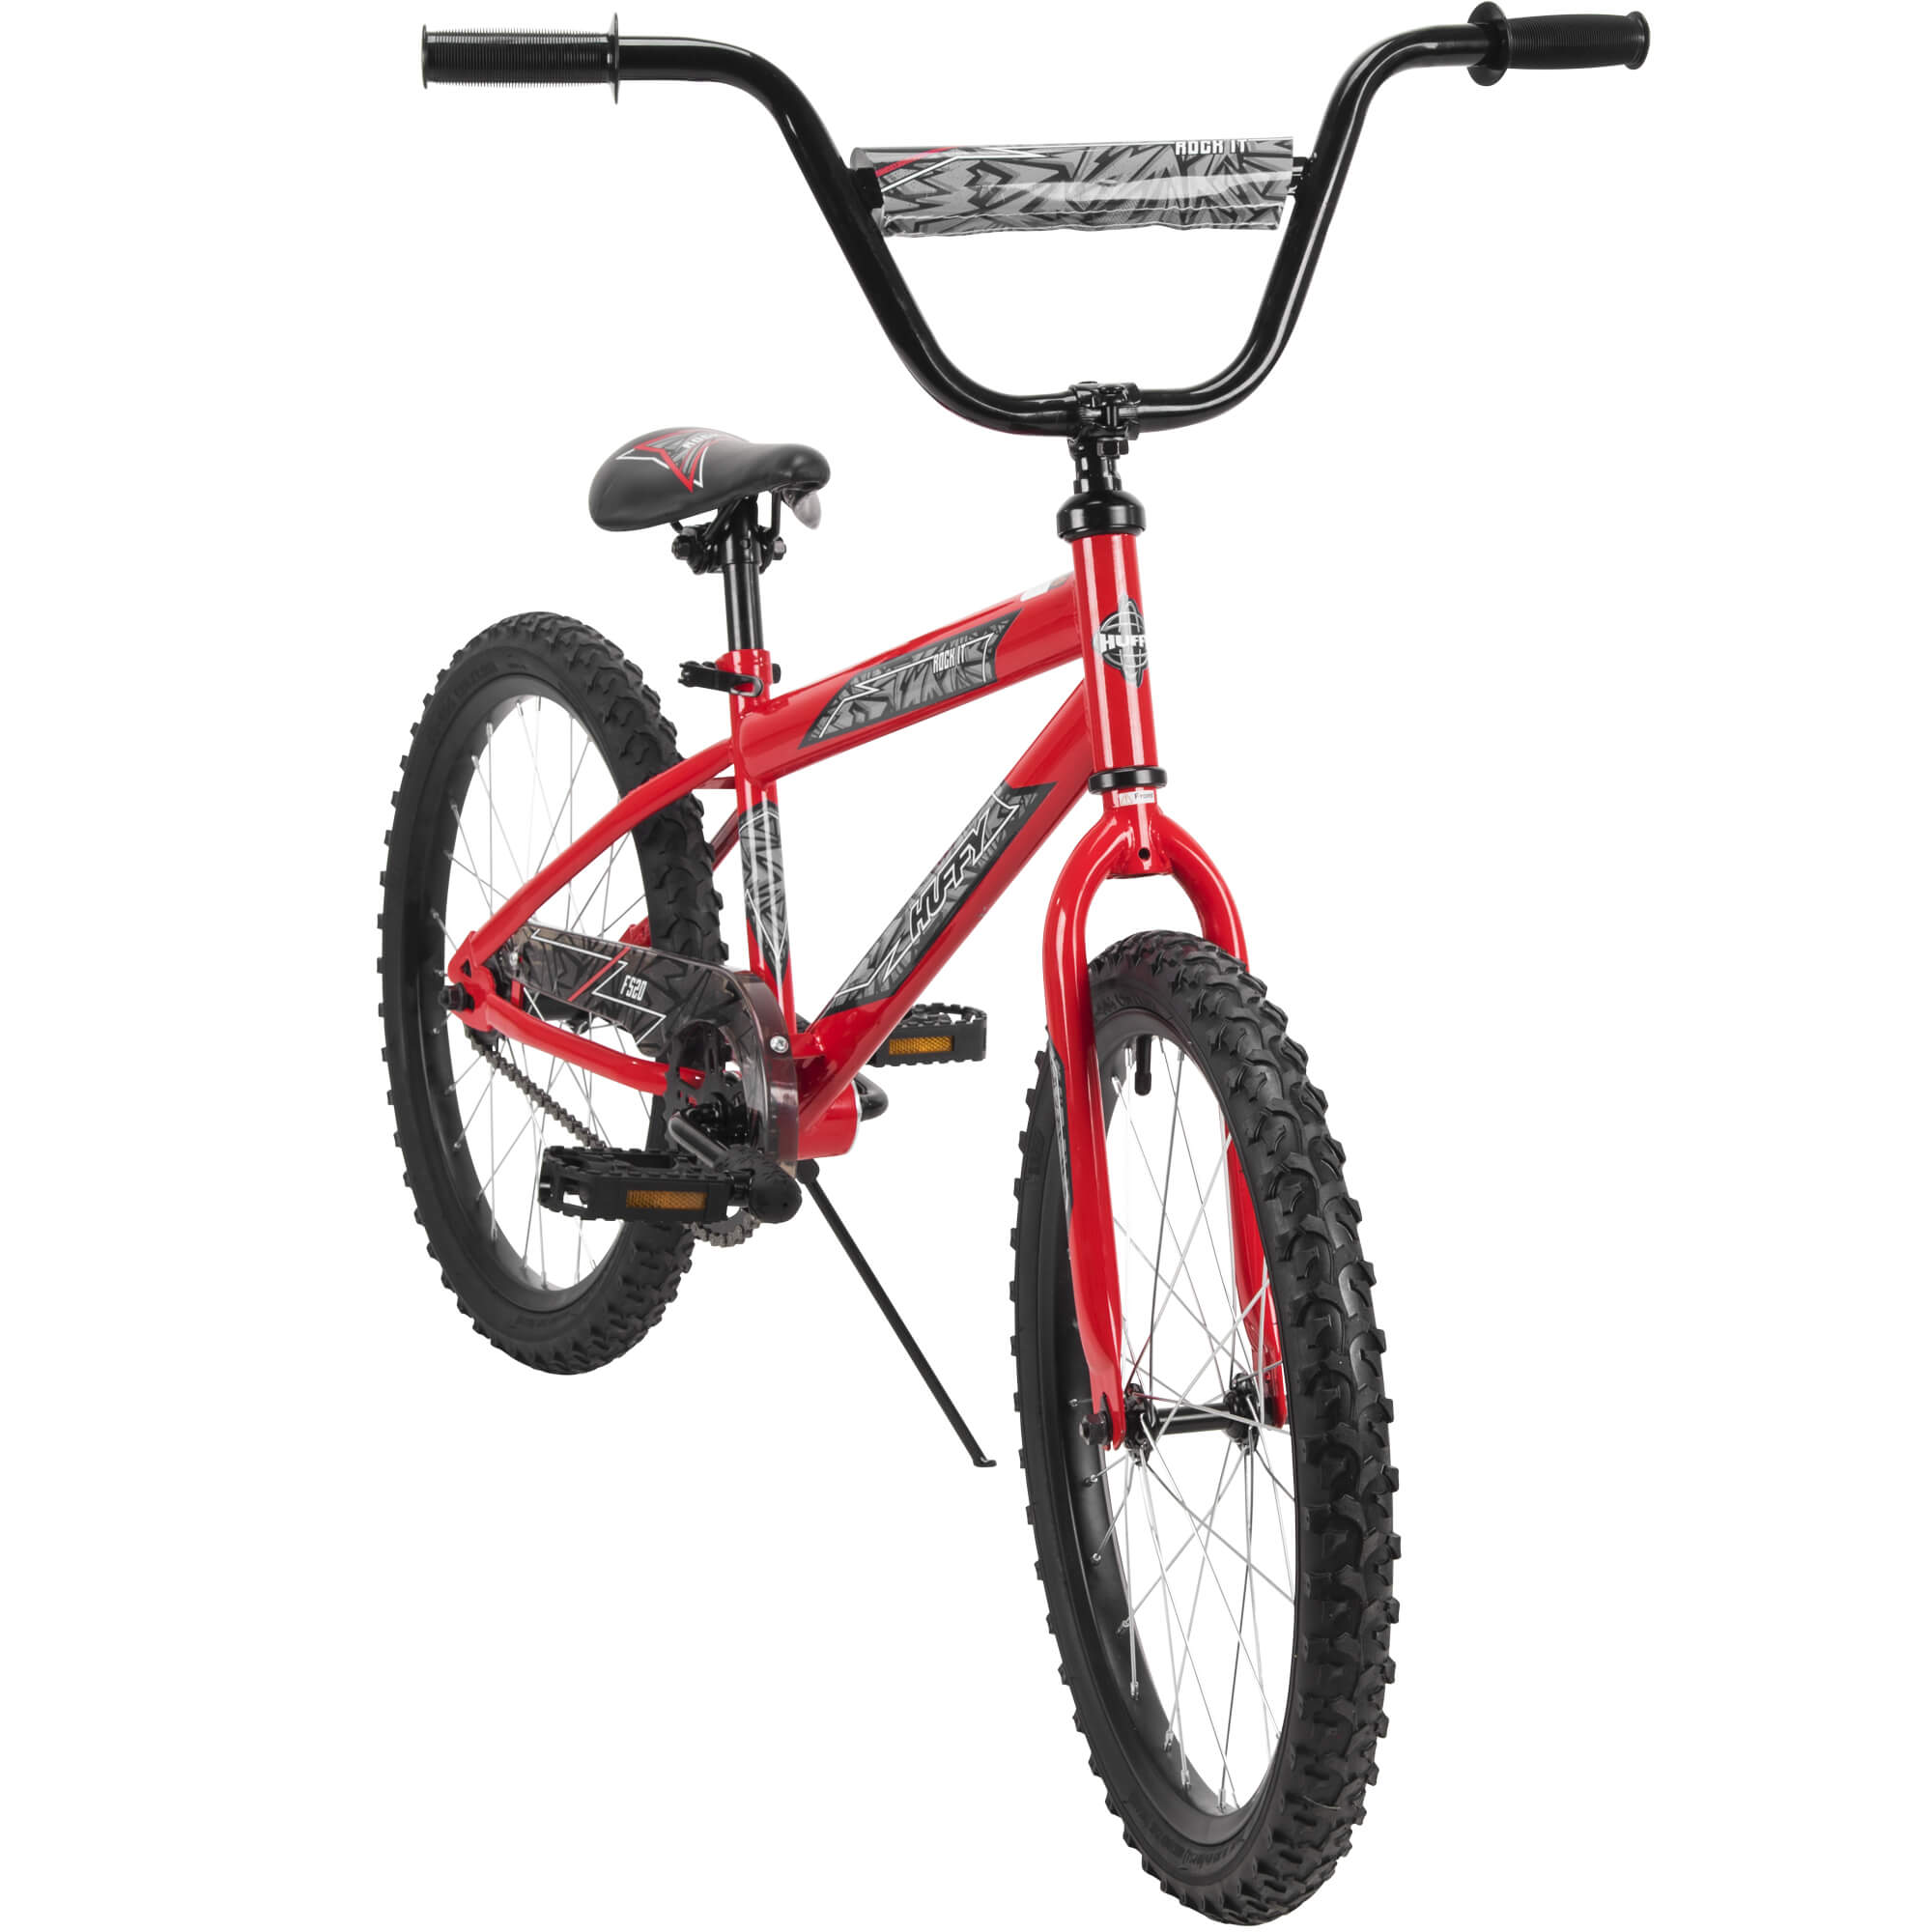 Huffy 20" Rock It EZ Build Kids Bike for Boys, Red - image 2 of 6